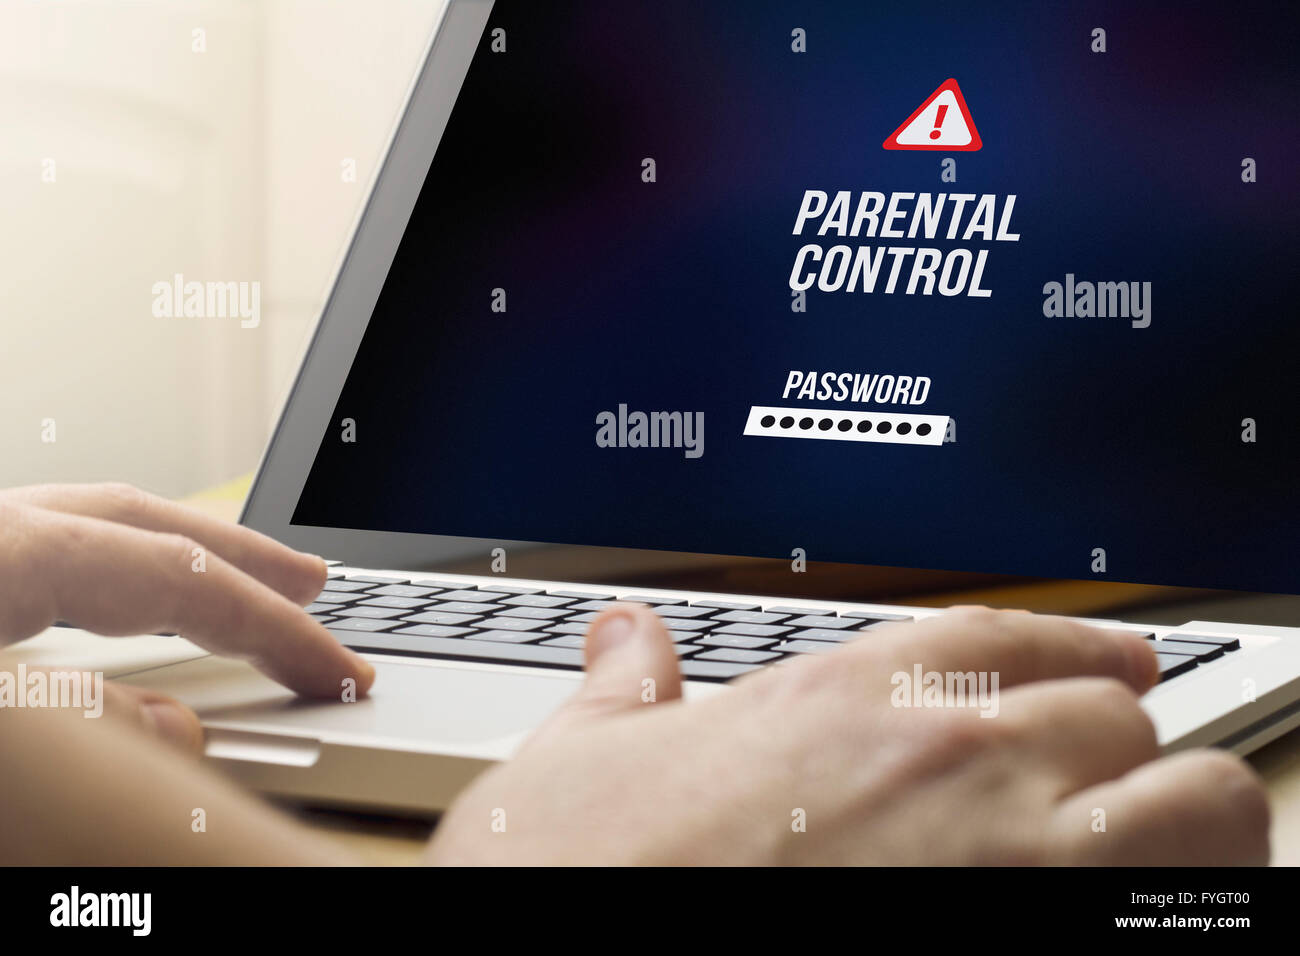 technology child protection concept: man using a laptop with parental control on the screen. Screen graphics are made up. Stock Photo